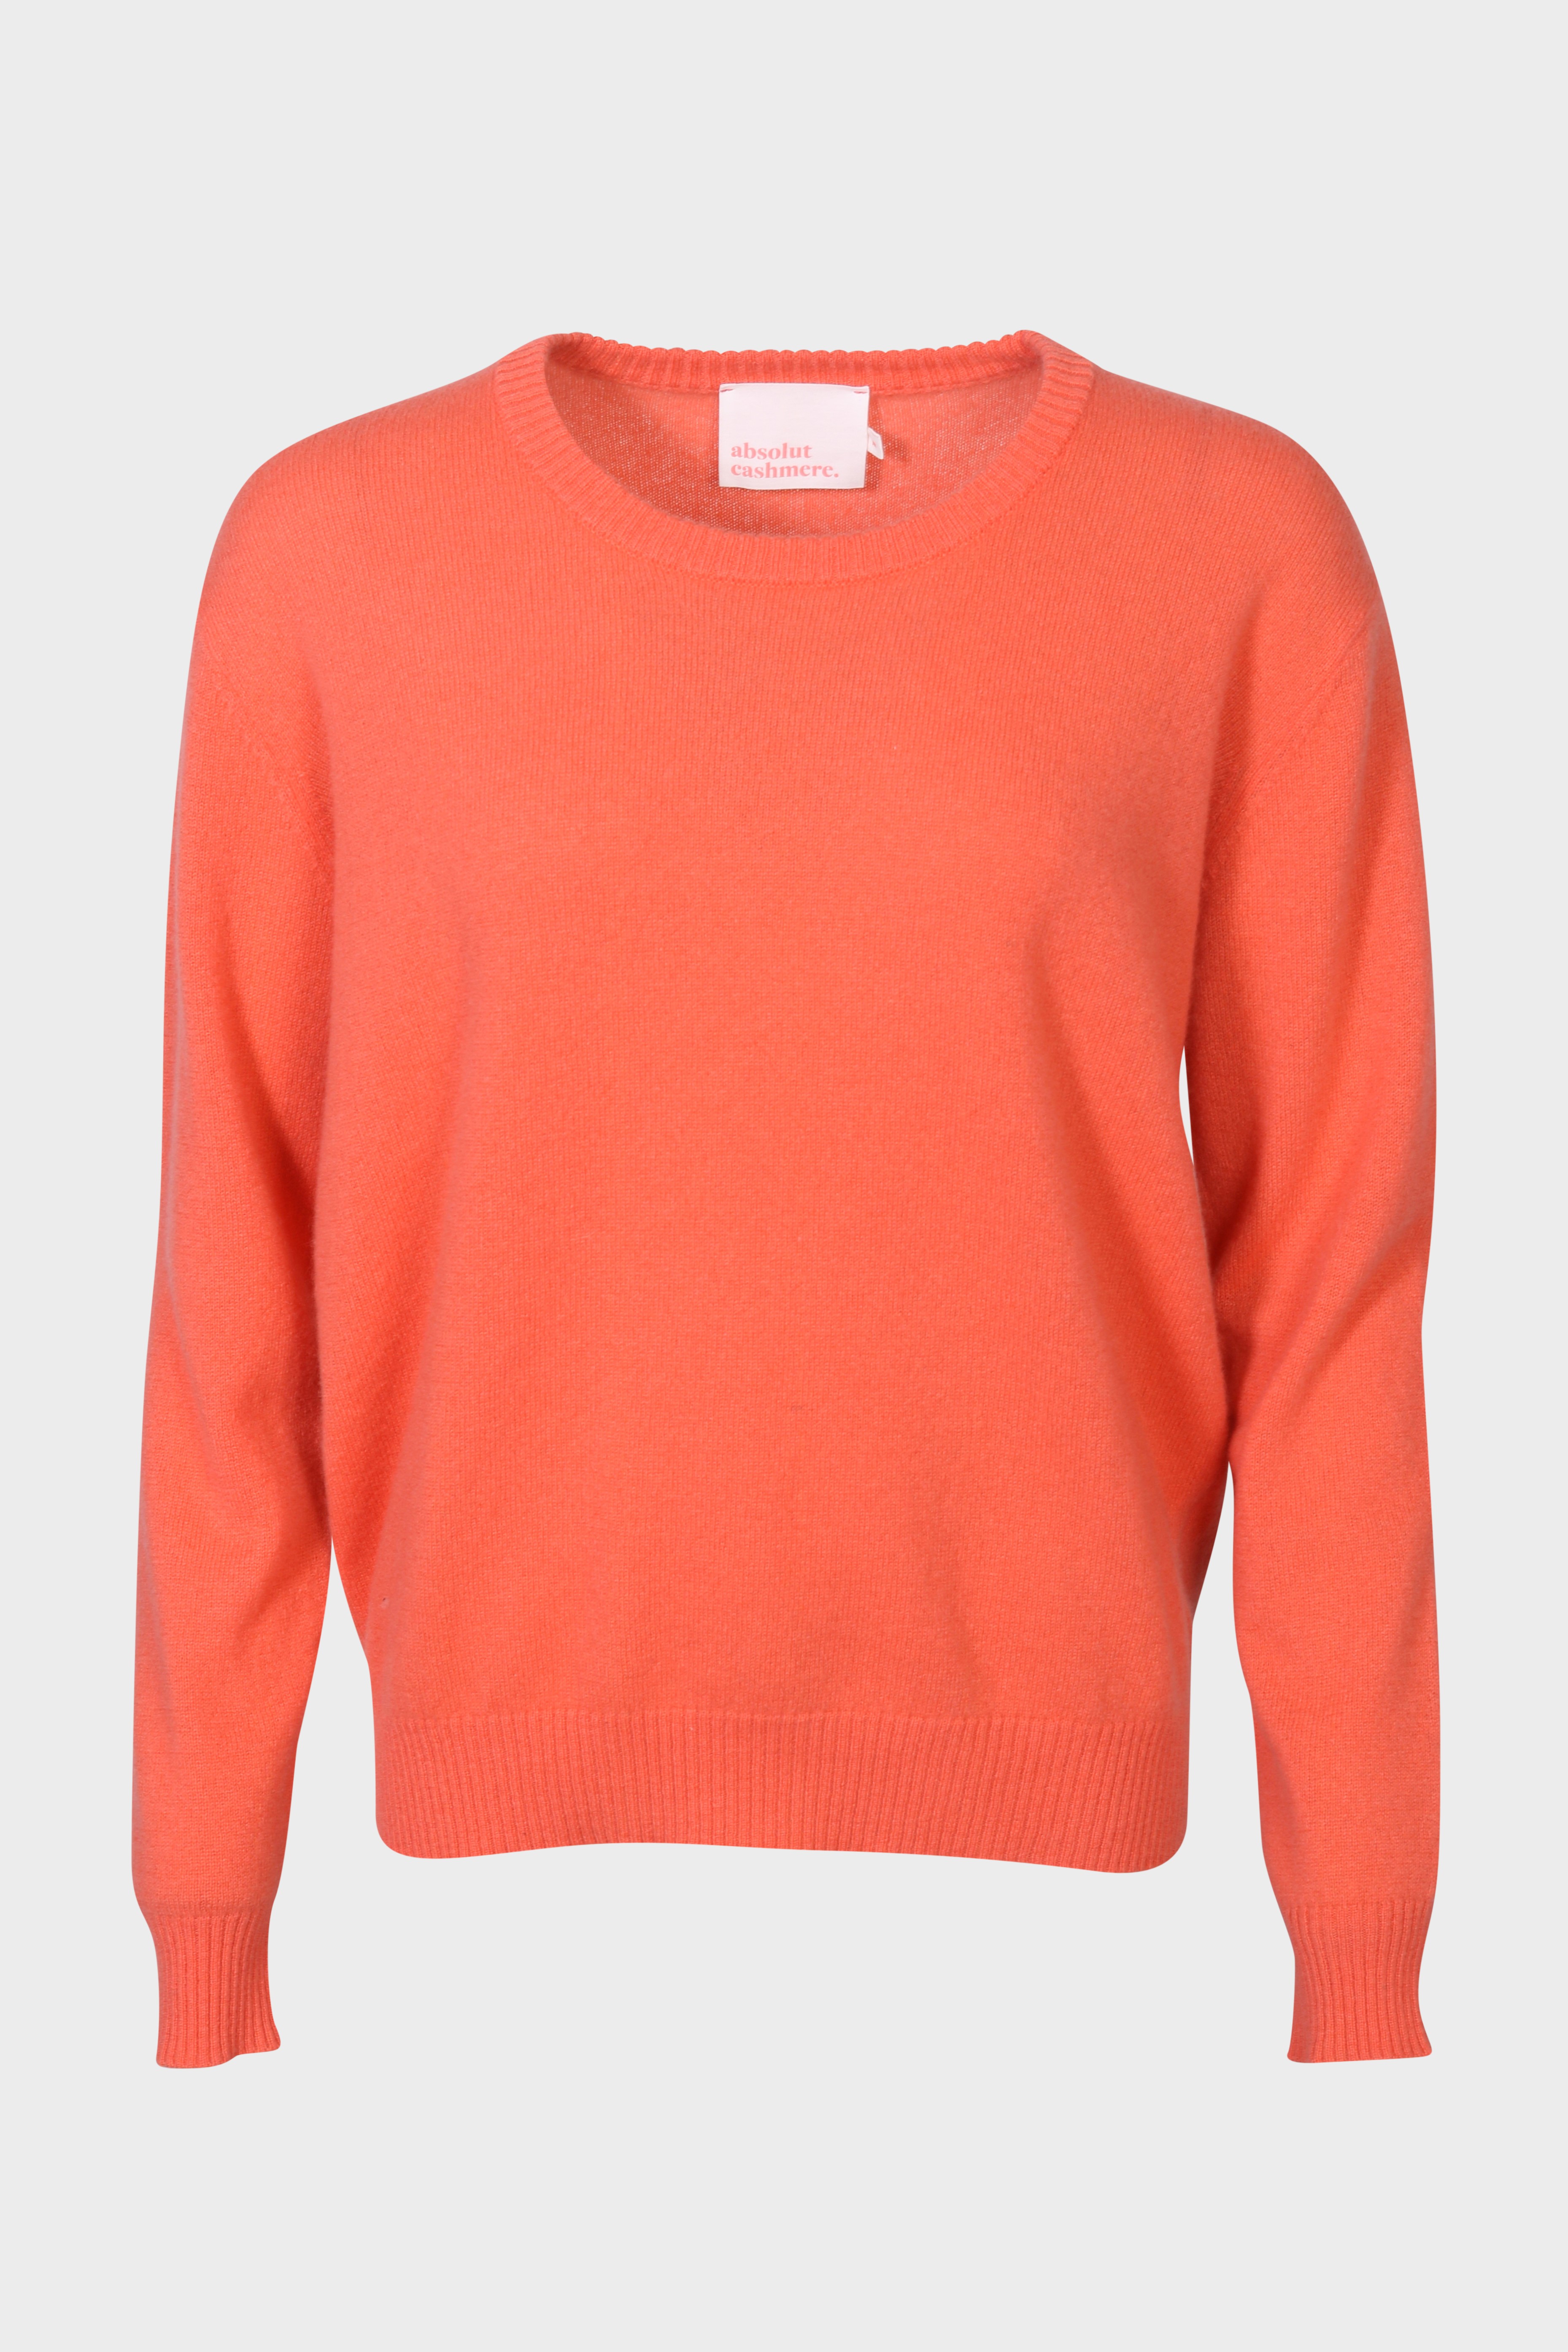 ABSOLUT CASHMERE Sweater Ysee Melon S